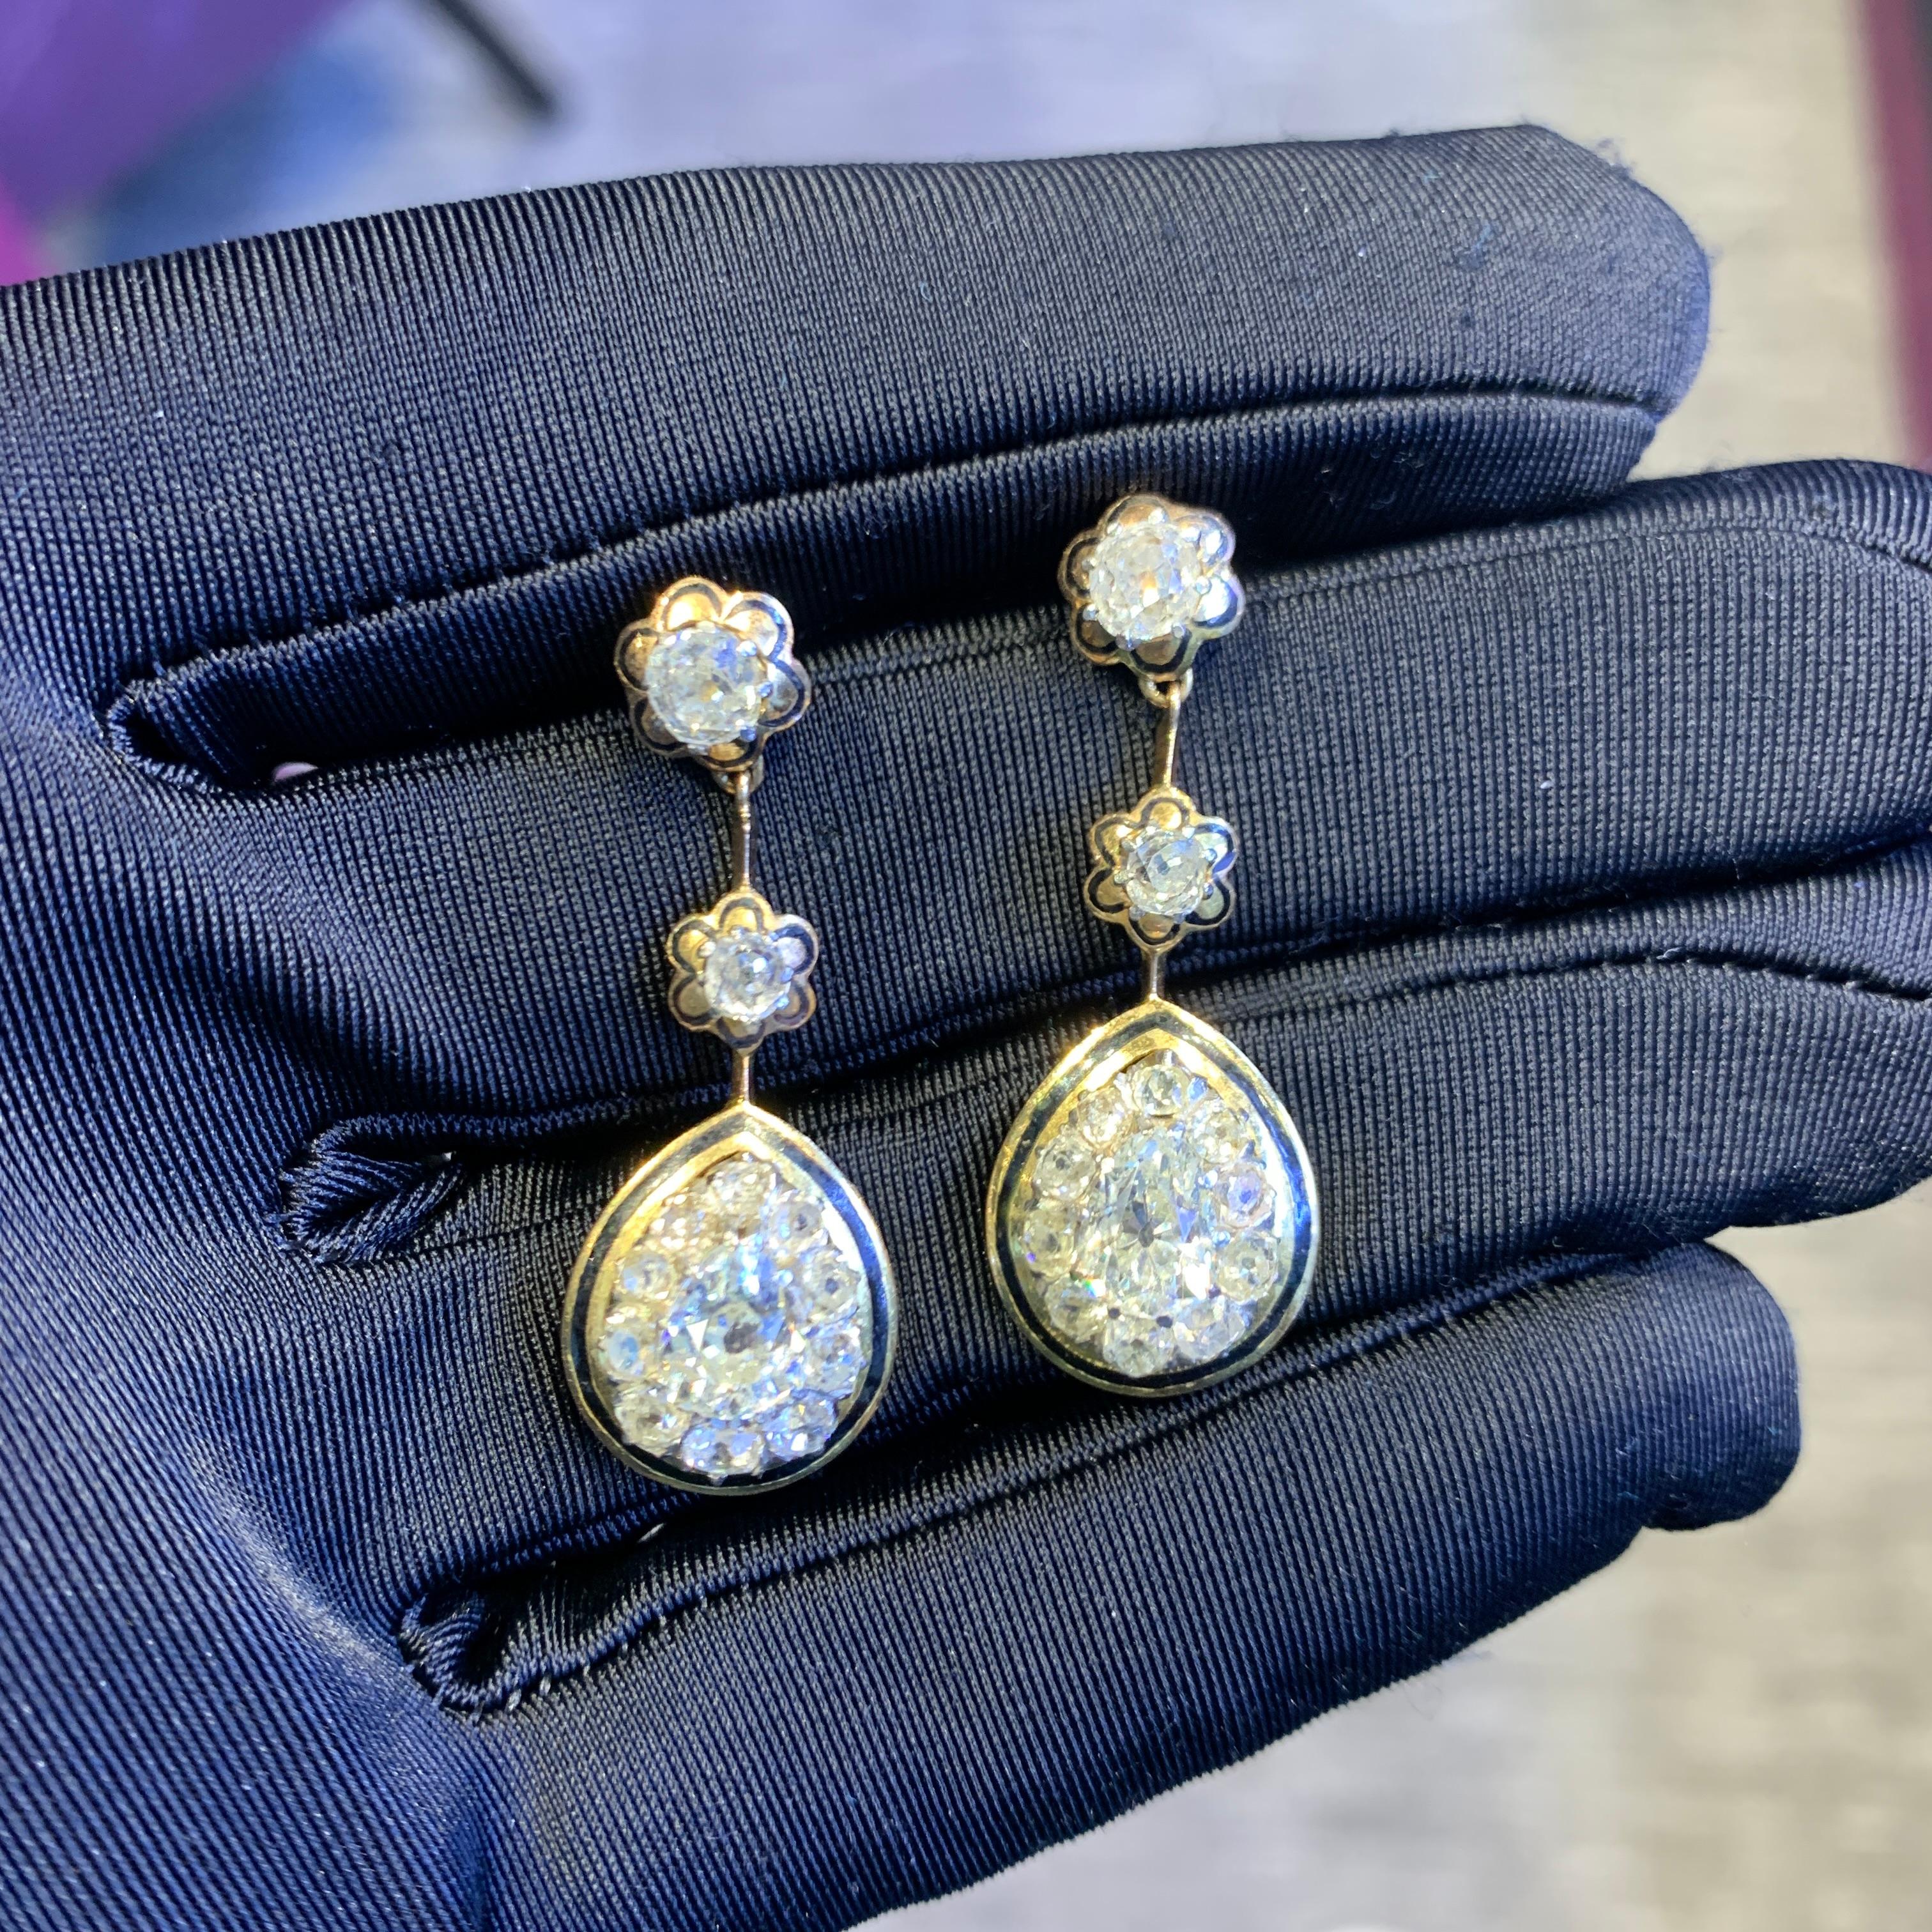 Victorian Antique Cut Diamond & Enamel Earrings In Excellent Condition For Sale In New York, NY